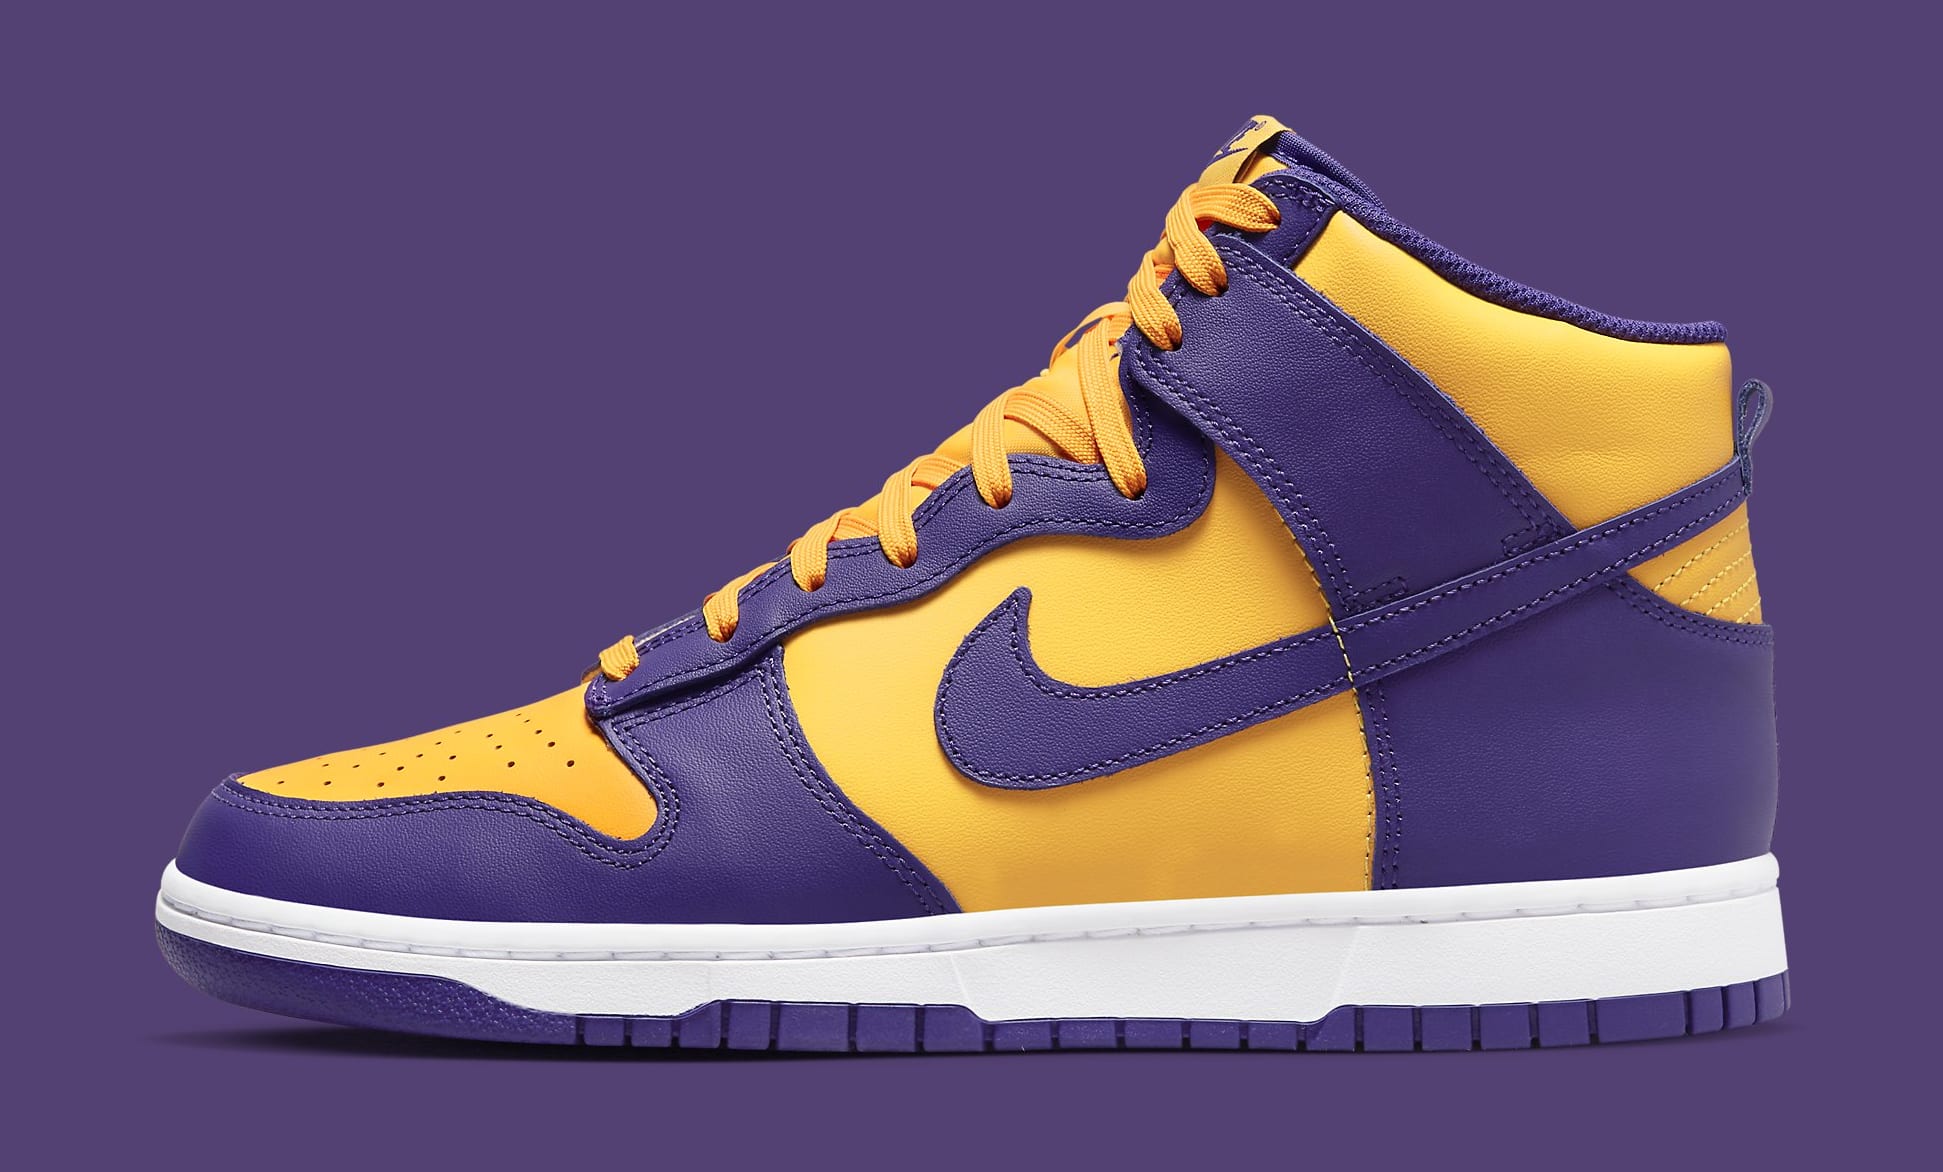 Nike Dunk High 'Court Purple' DD1399 500 Lateral